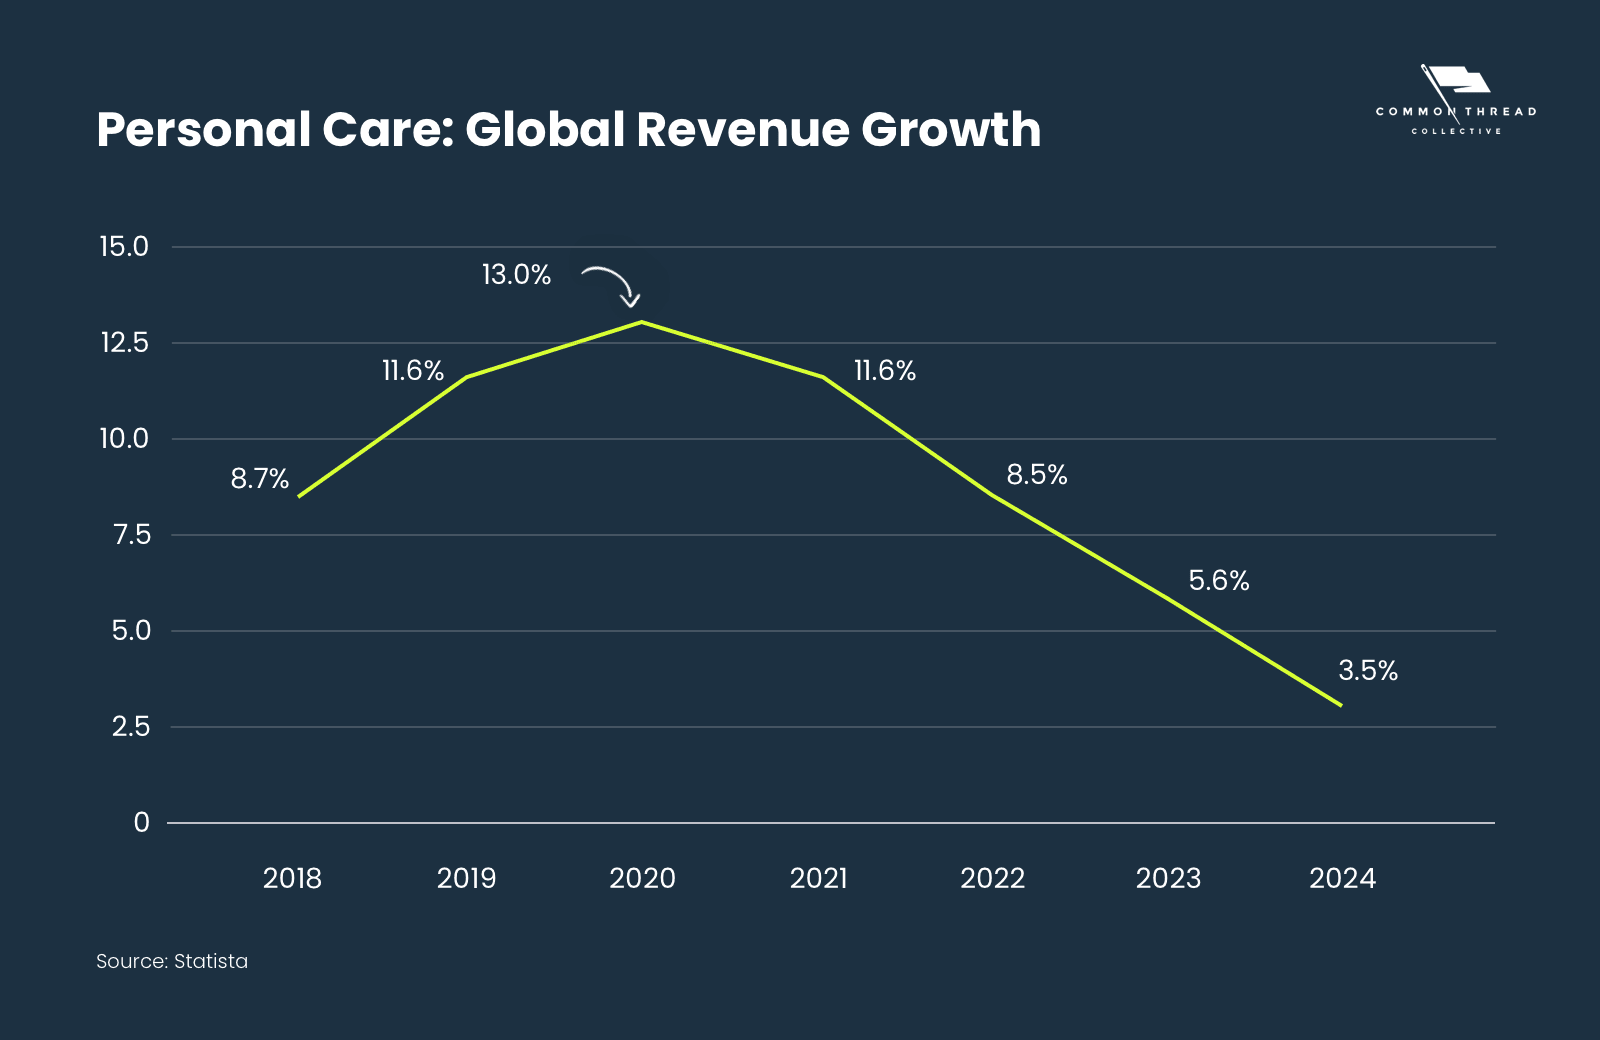 Personal Care Global Revenue Growth